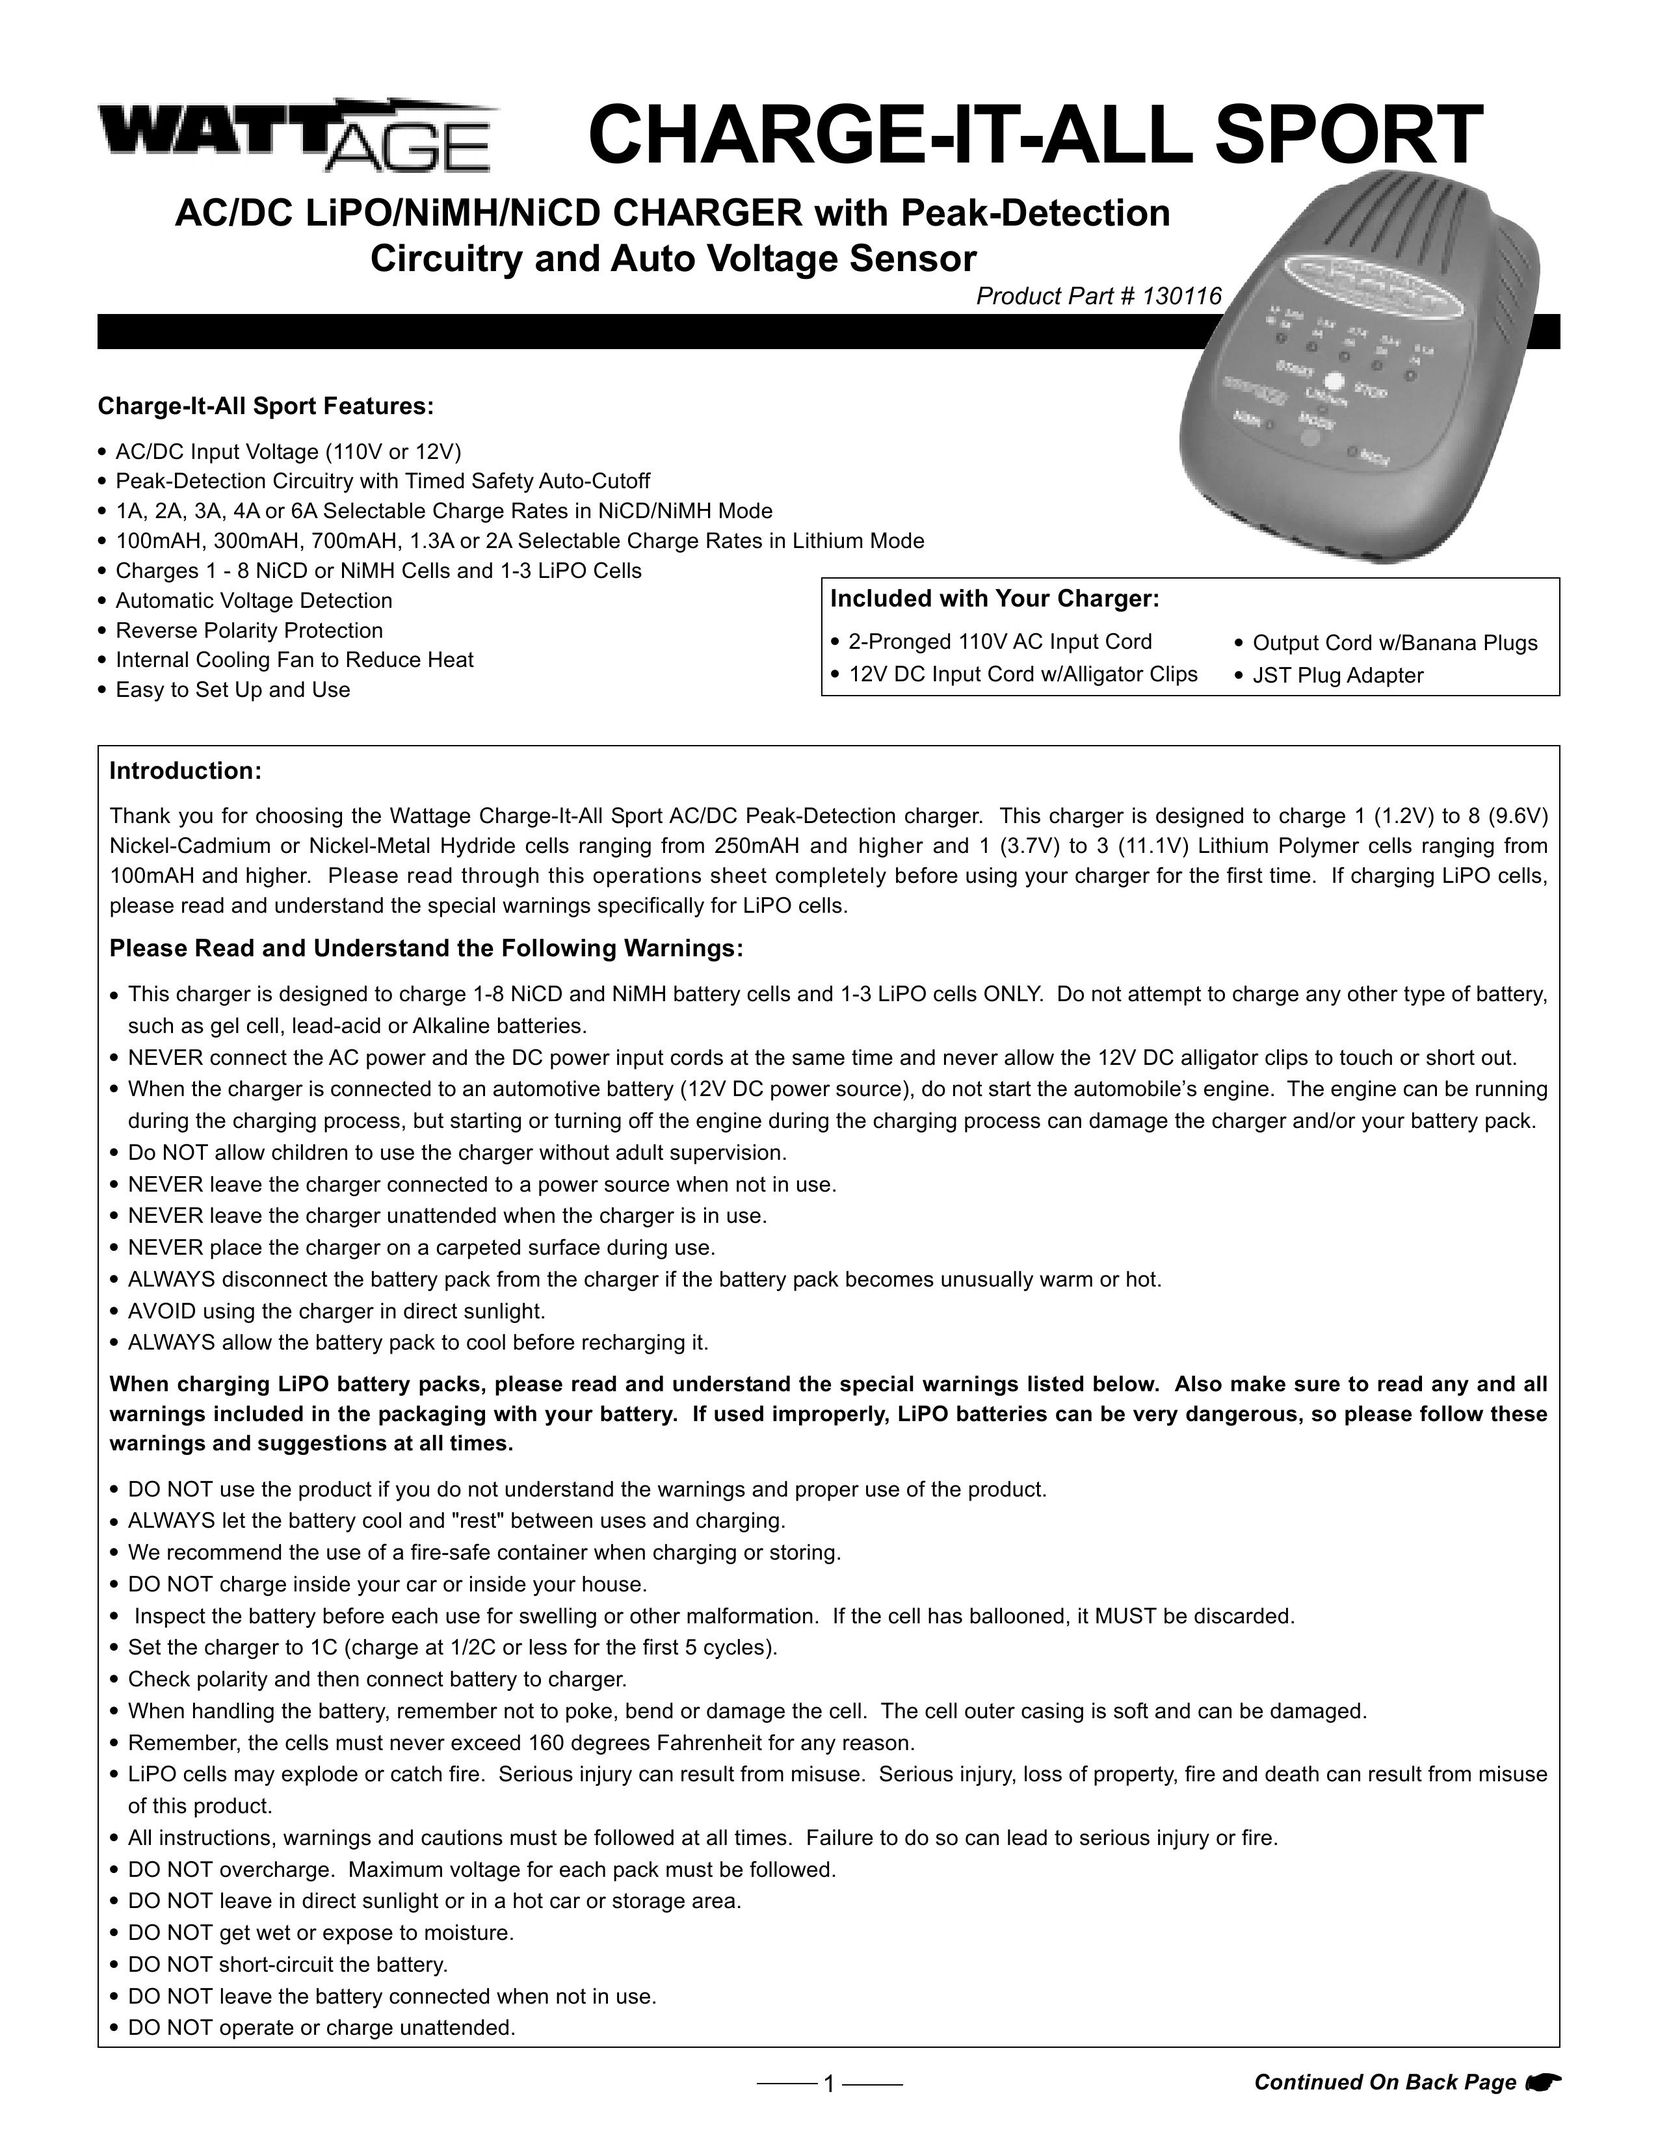 Maytag 130116 Battery Charger User Manual